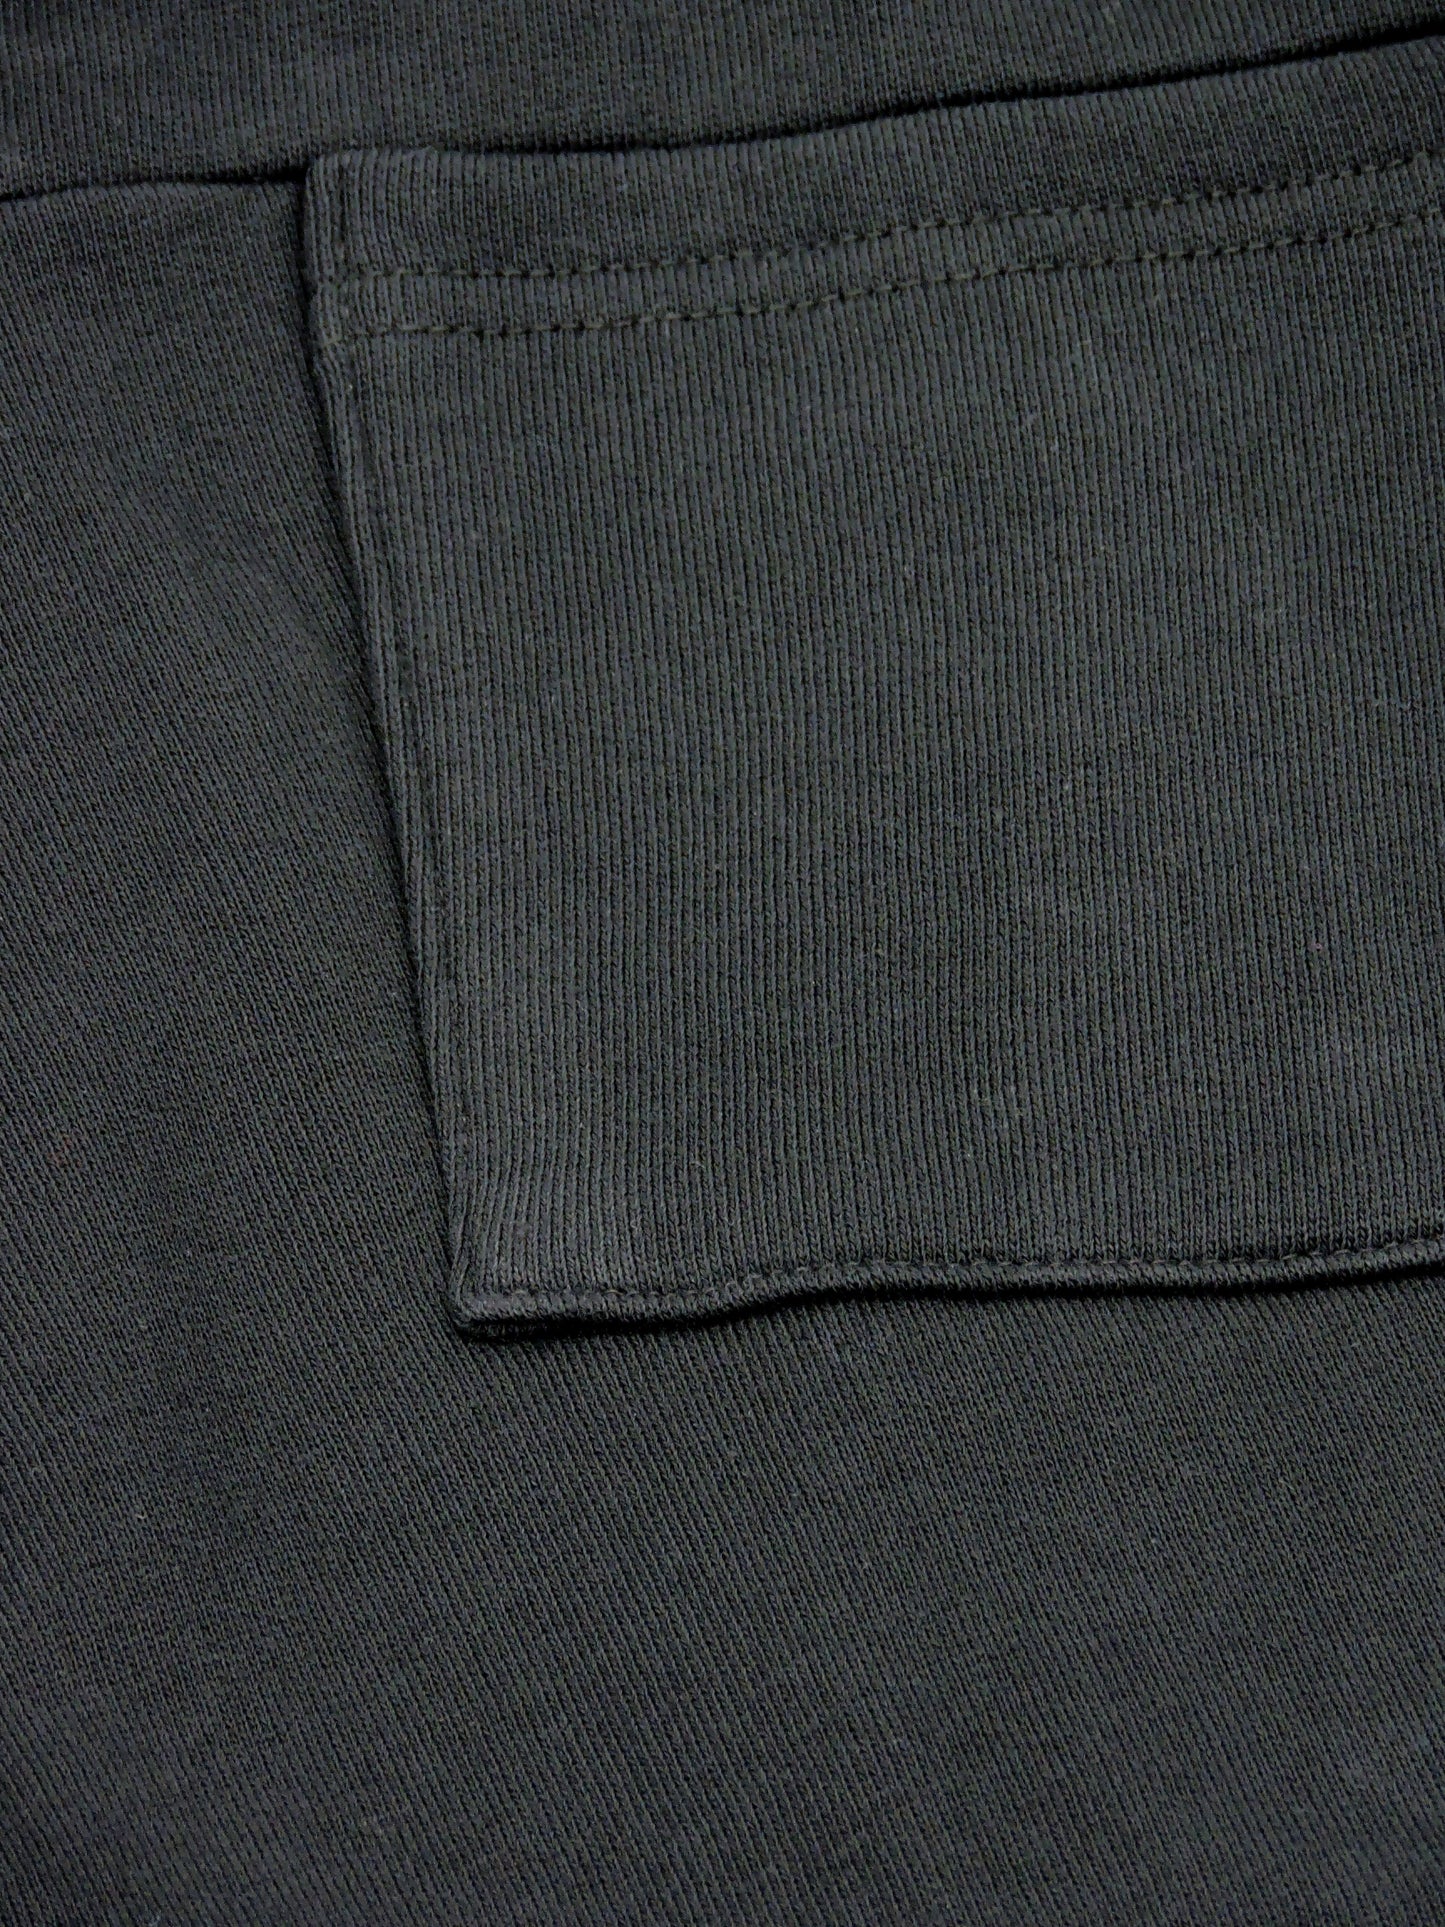 Close up of the back pocket and french terry material